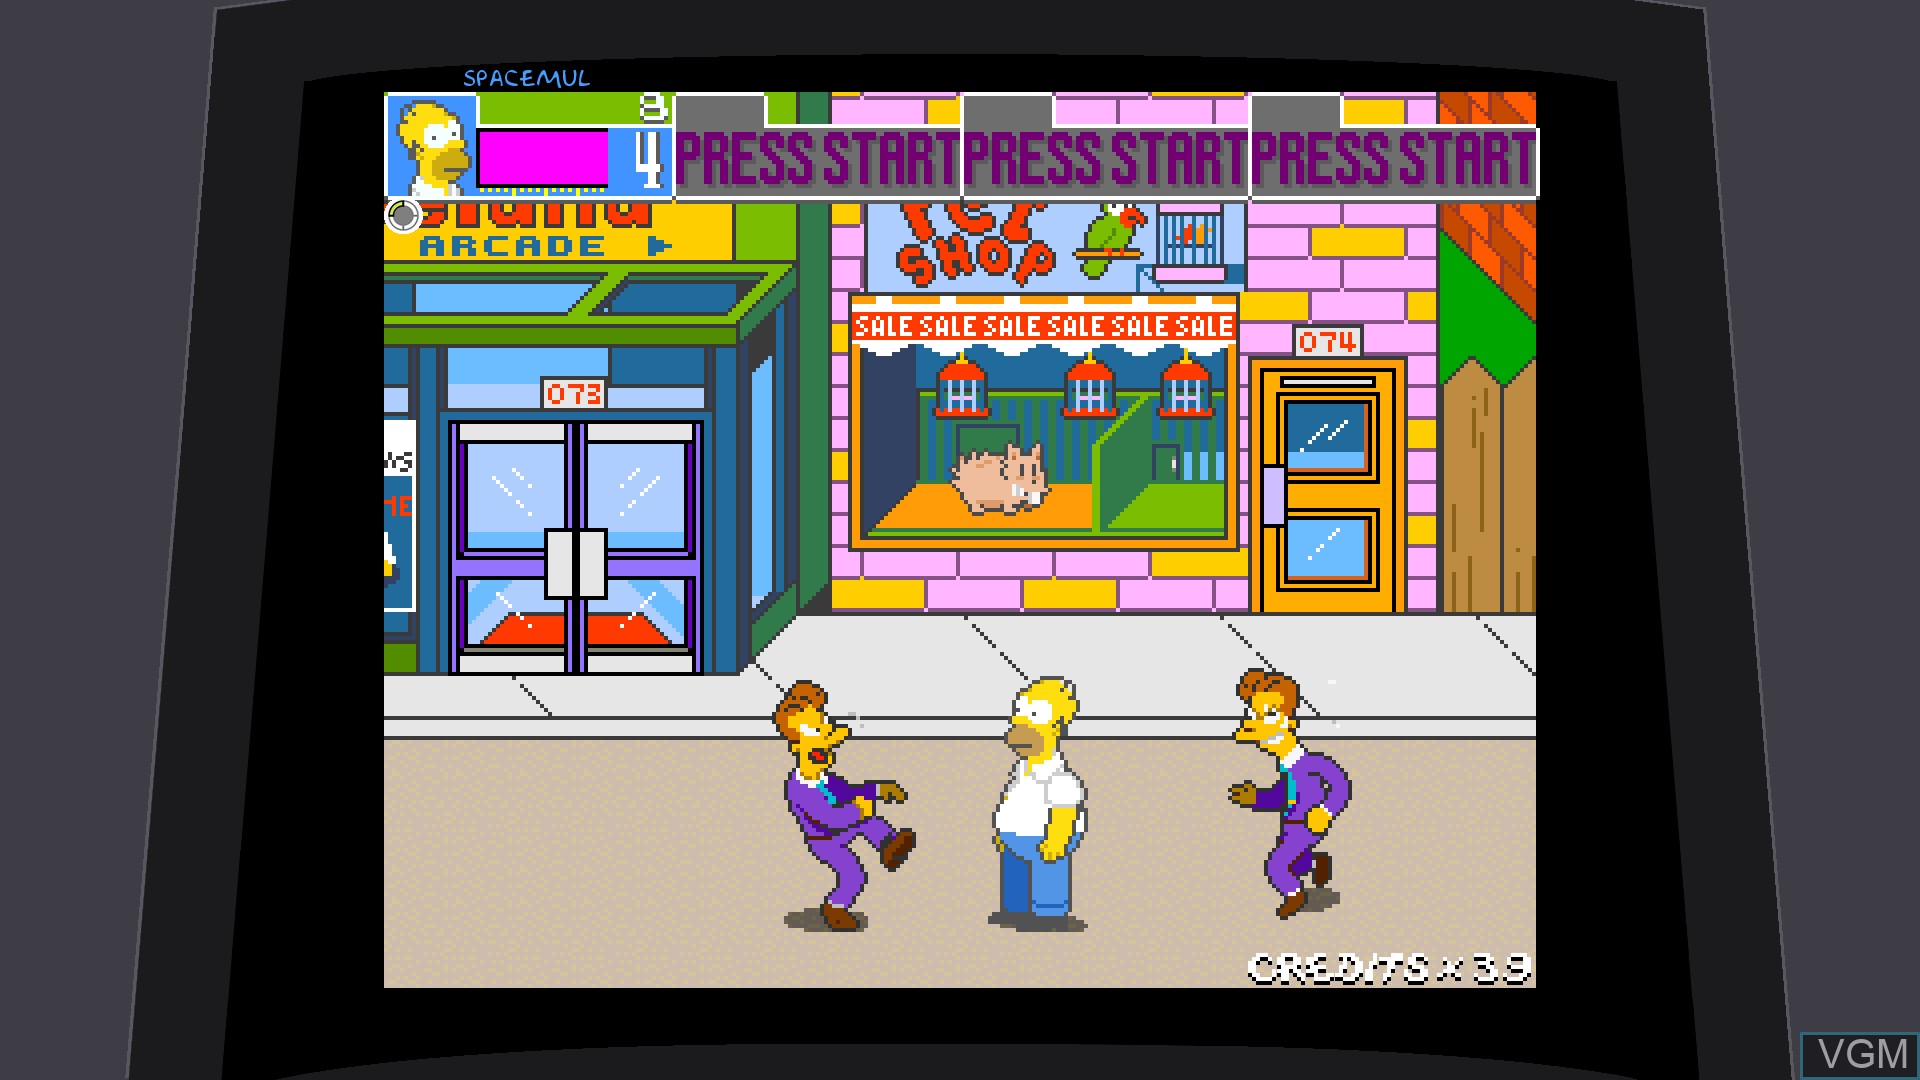 Simpsons Arcade Game, The